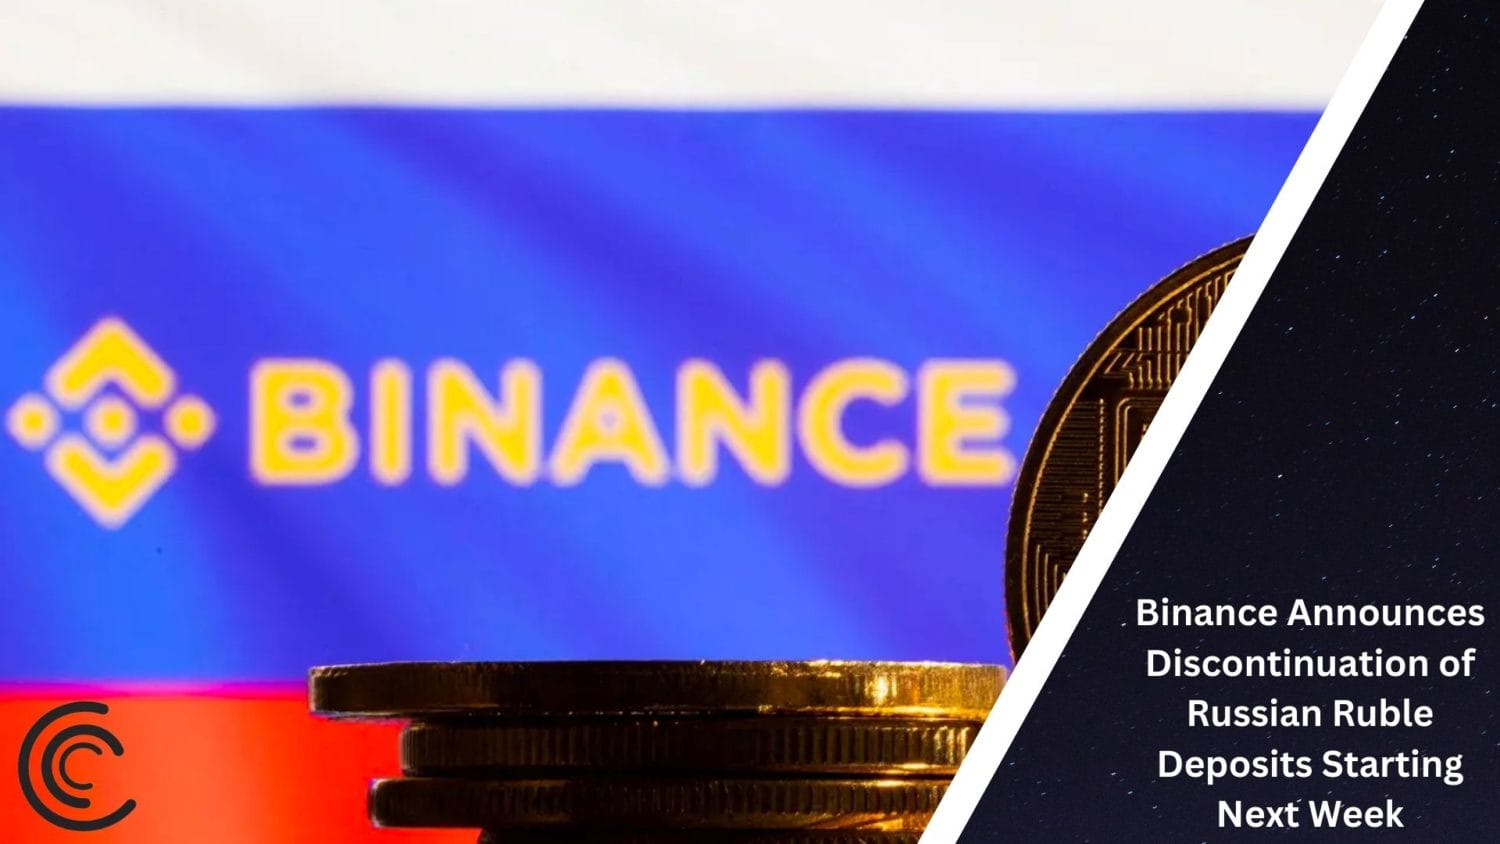 Binance Announces Discontinuation Of Russian Ruble Deposits Starting Next Week